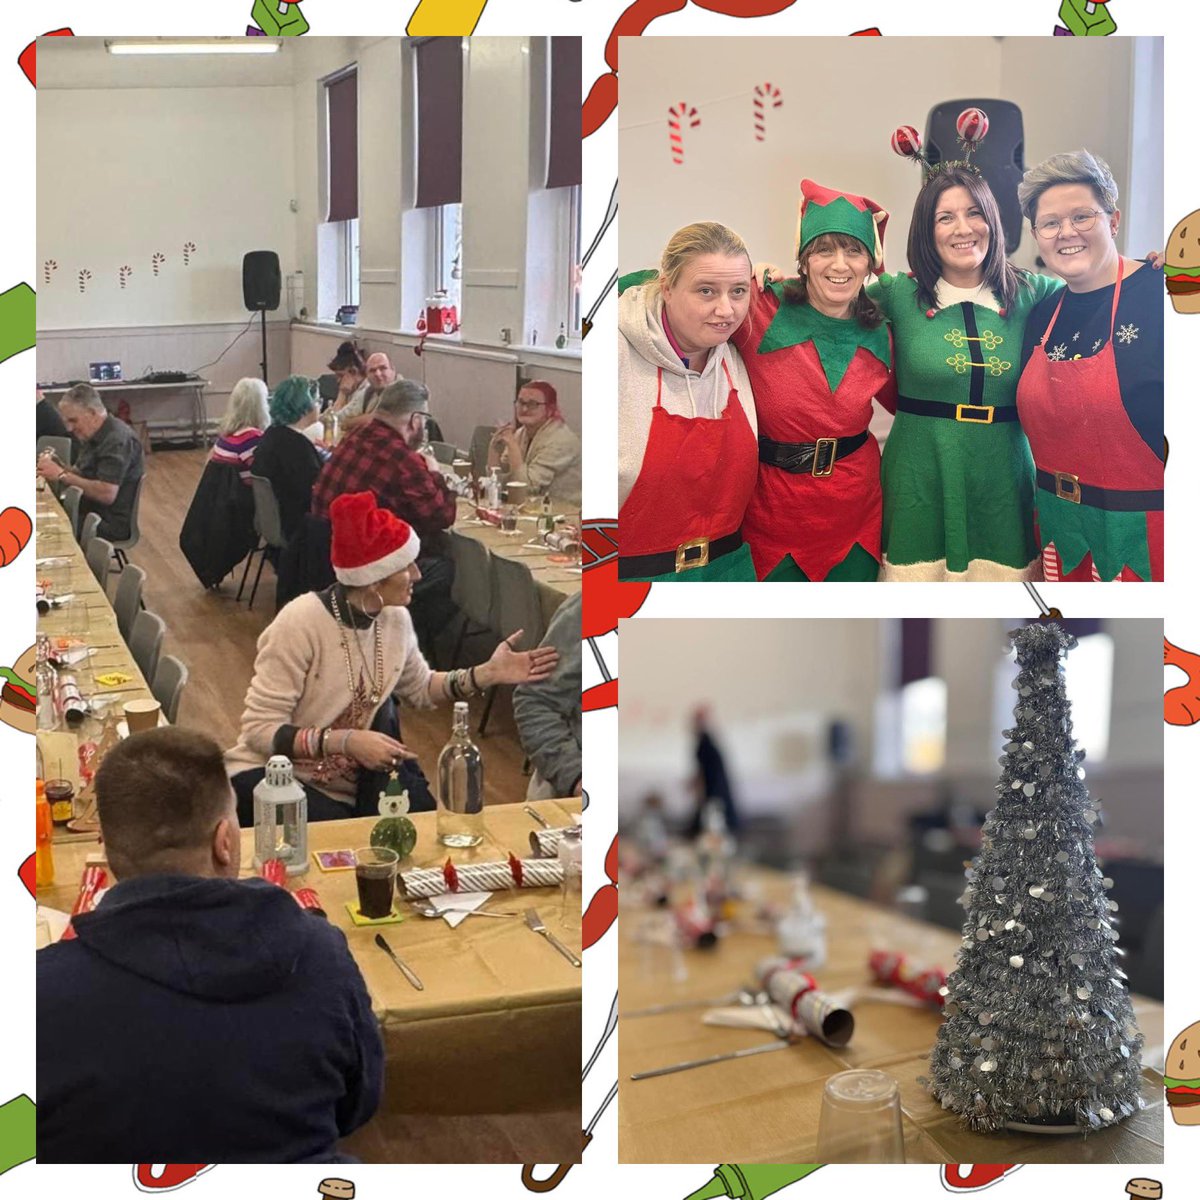 Well done to the Nest Wellbeing group for serving Christmas dinner to a fab group of people within the community. Great to be part of this and give back by serving the community. Same again tomorrow 🤩👏 @stone_fraser @ShelleyGSE @_KevinWells